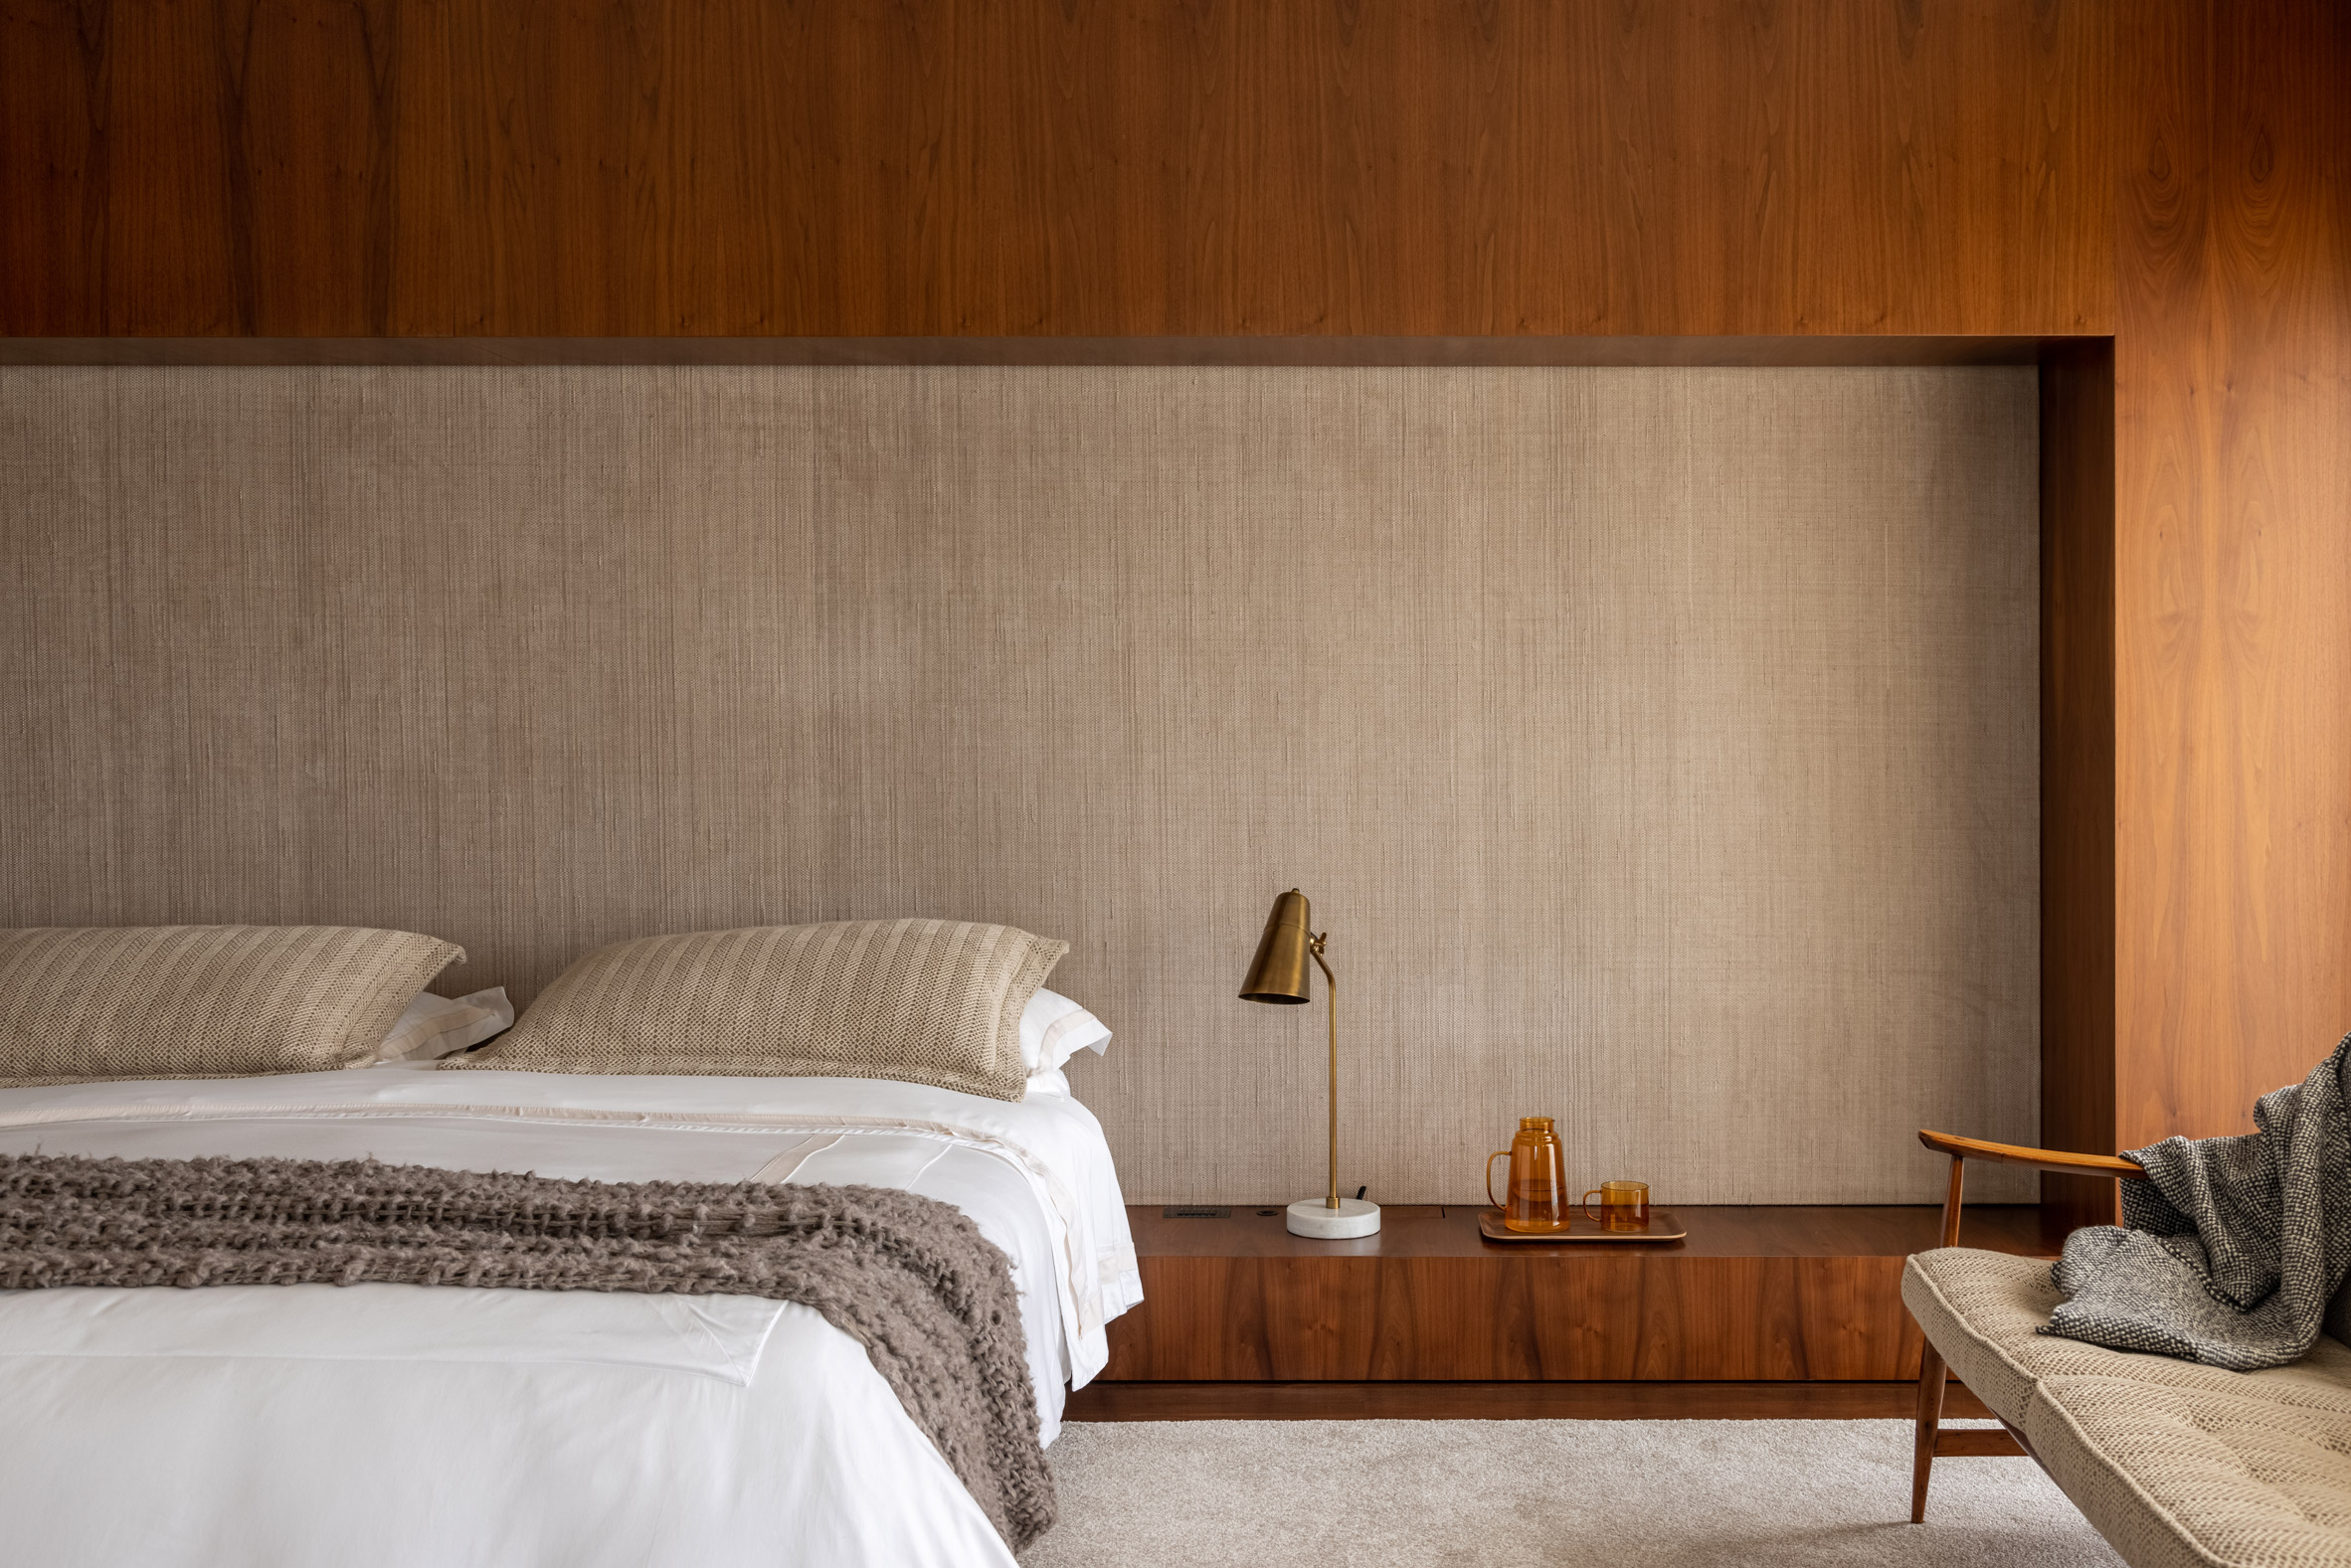 warm wooden panels create a rich backdrop in this bedroom while adding a calming influence of earthy tones to the room.